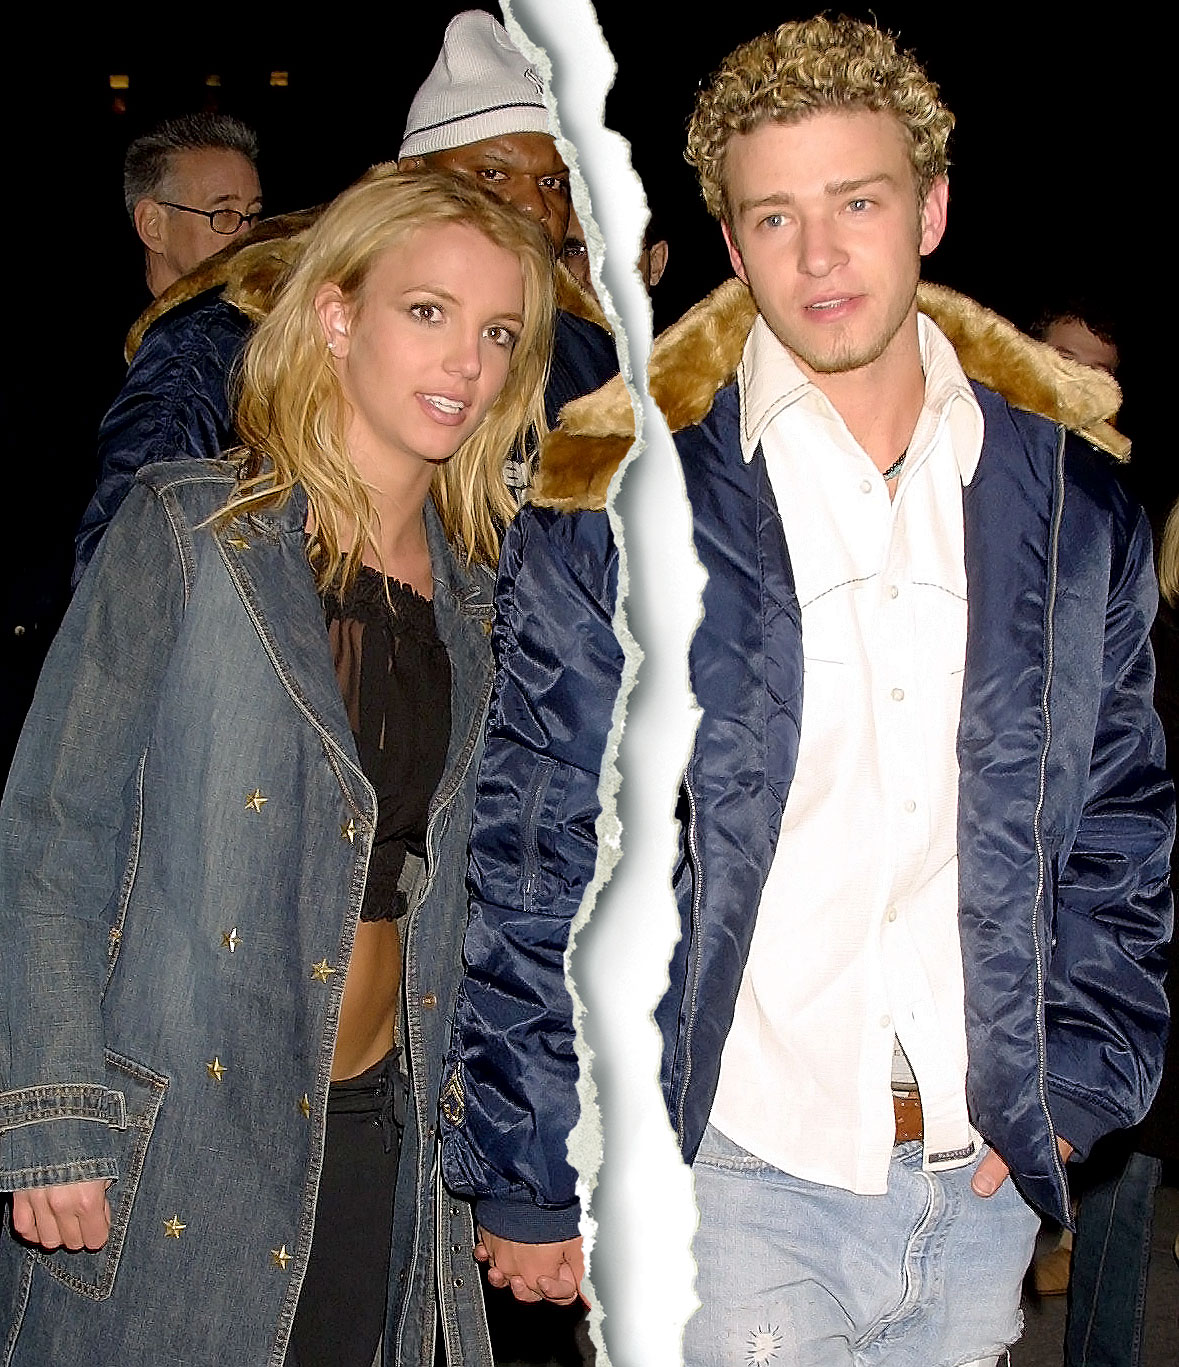 Britney Spears Justin Timberlake A Timeline Their Ups Downs 004